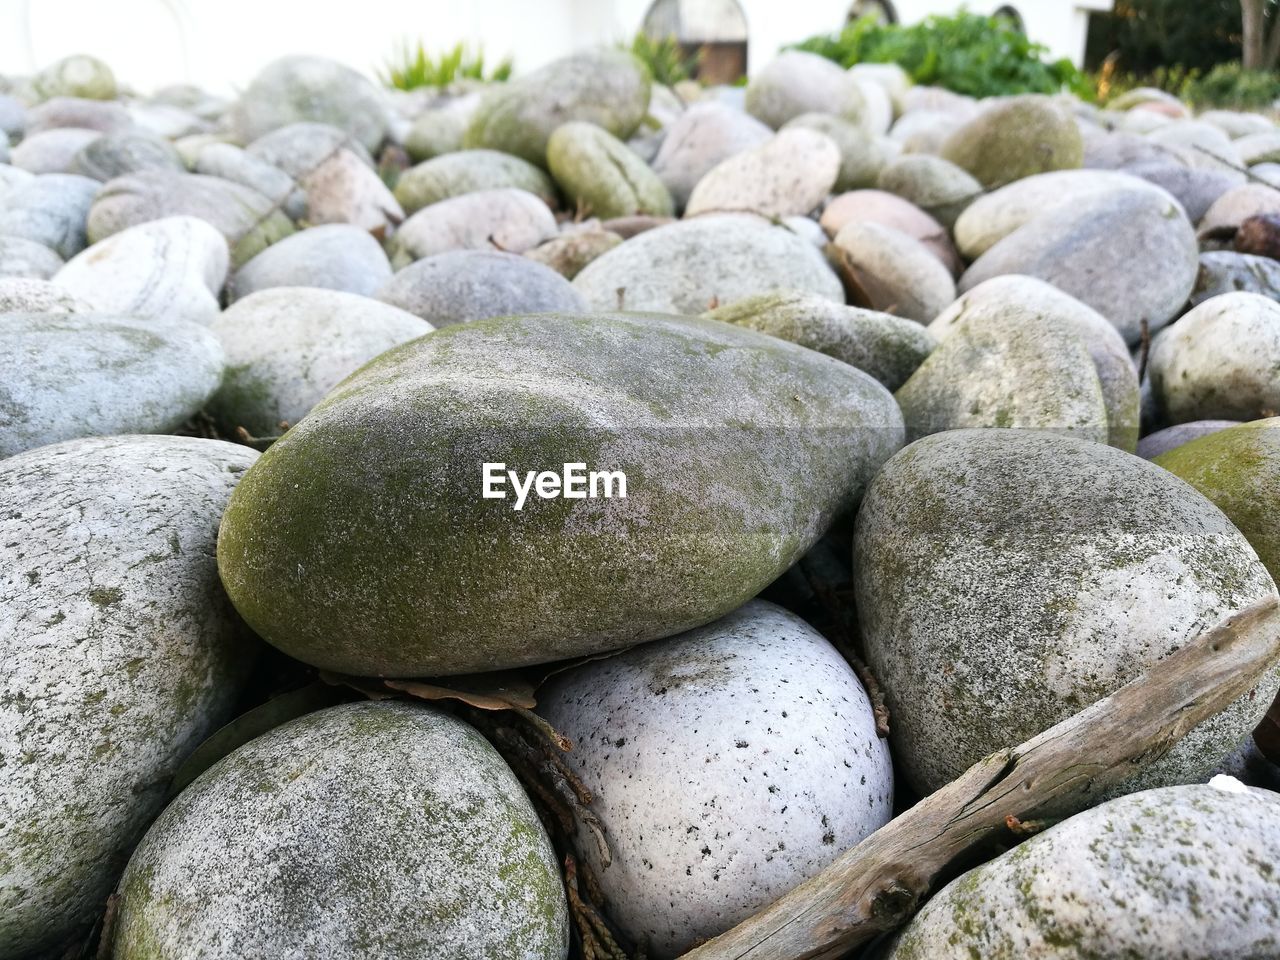 CLOSE-UP OF PEBBLES ON STONES